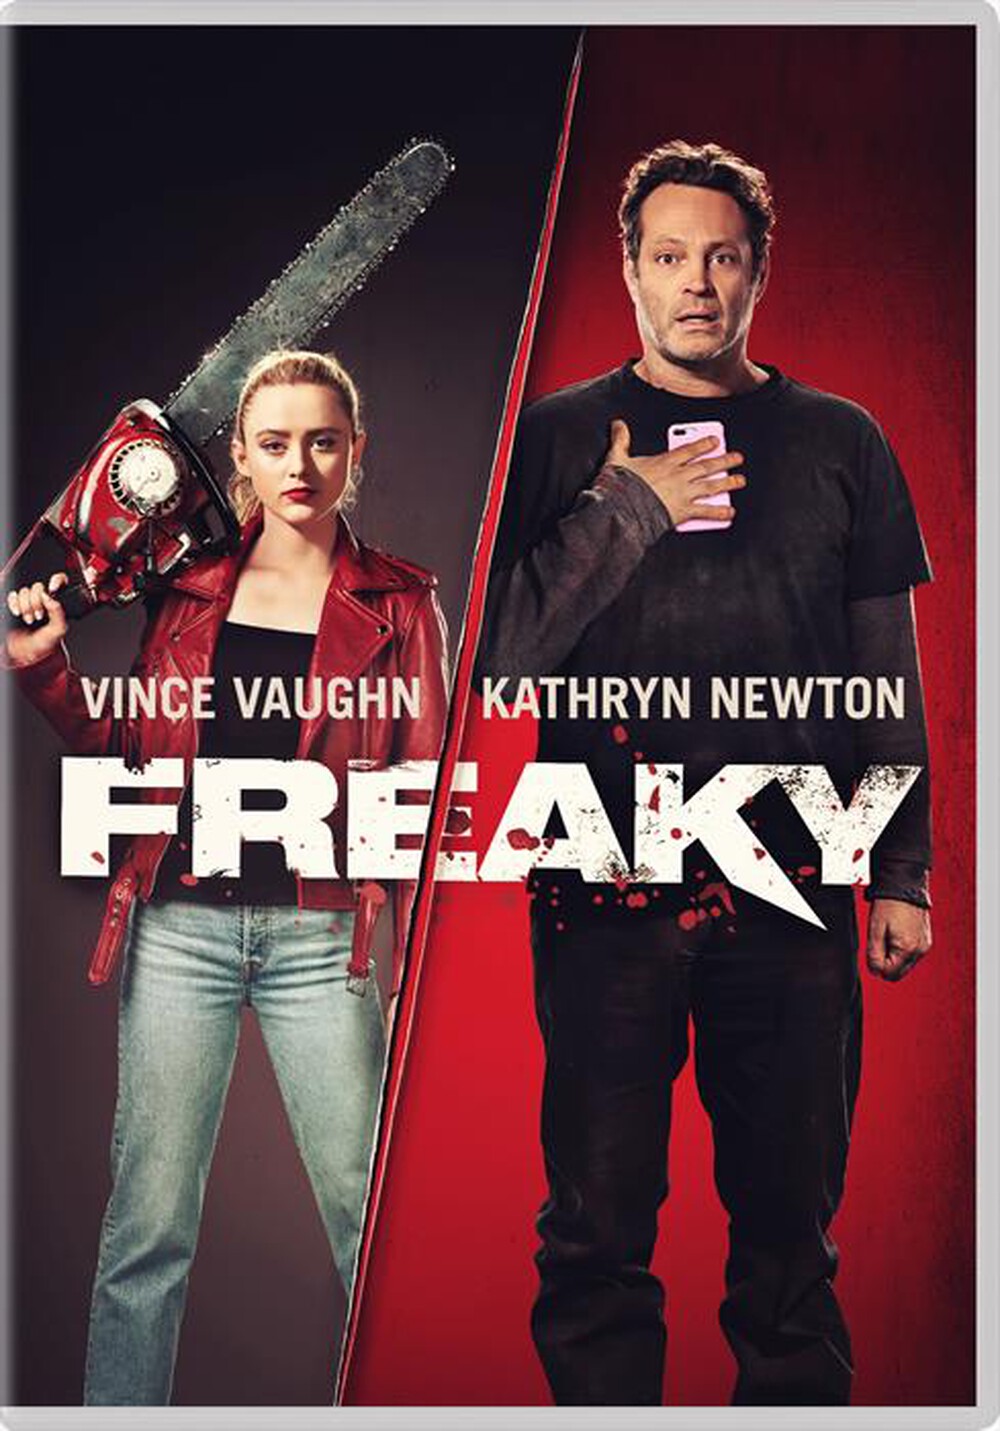 "UNIVERSAL PICTURES - Freaky"